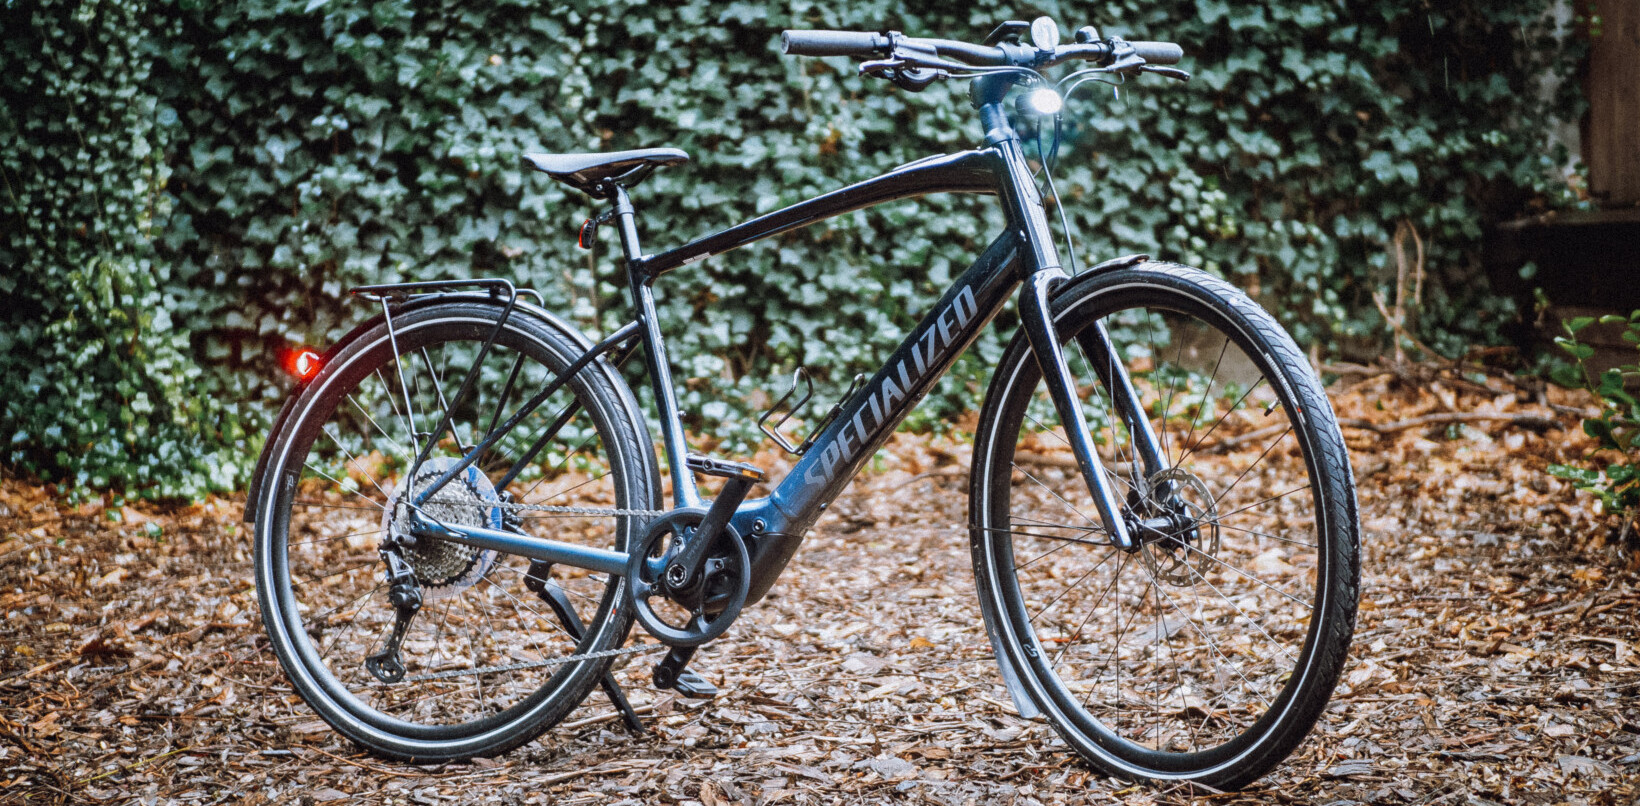 Your ebike doesn’t need a ton of power to be worth the price